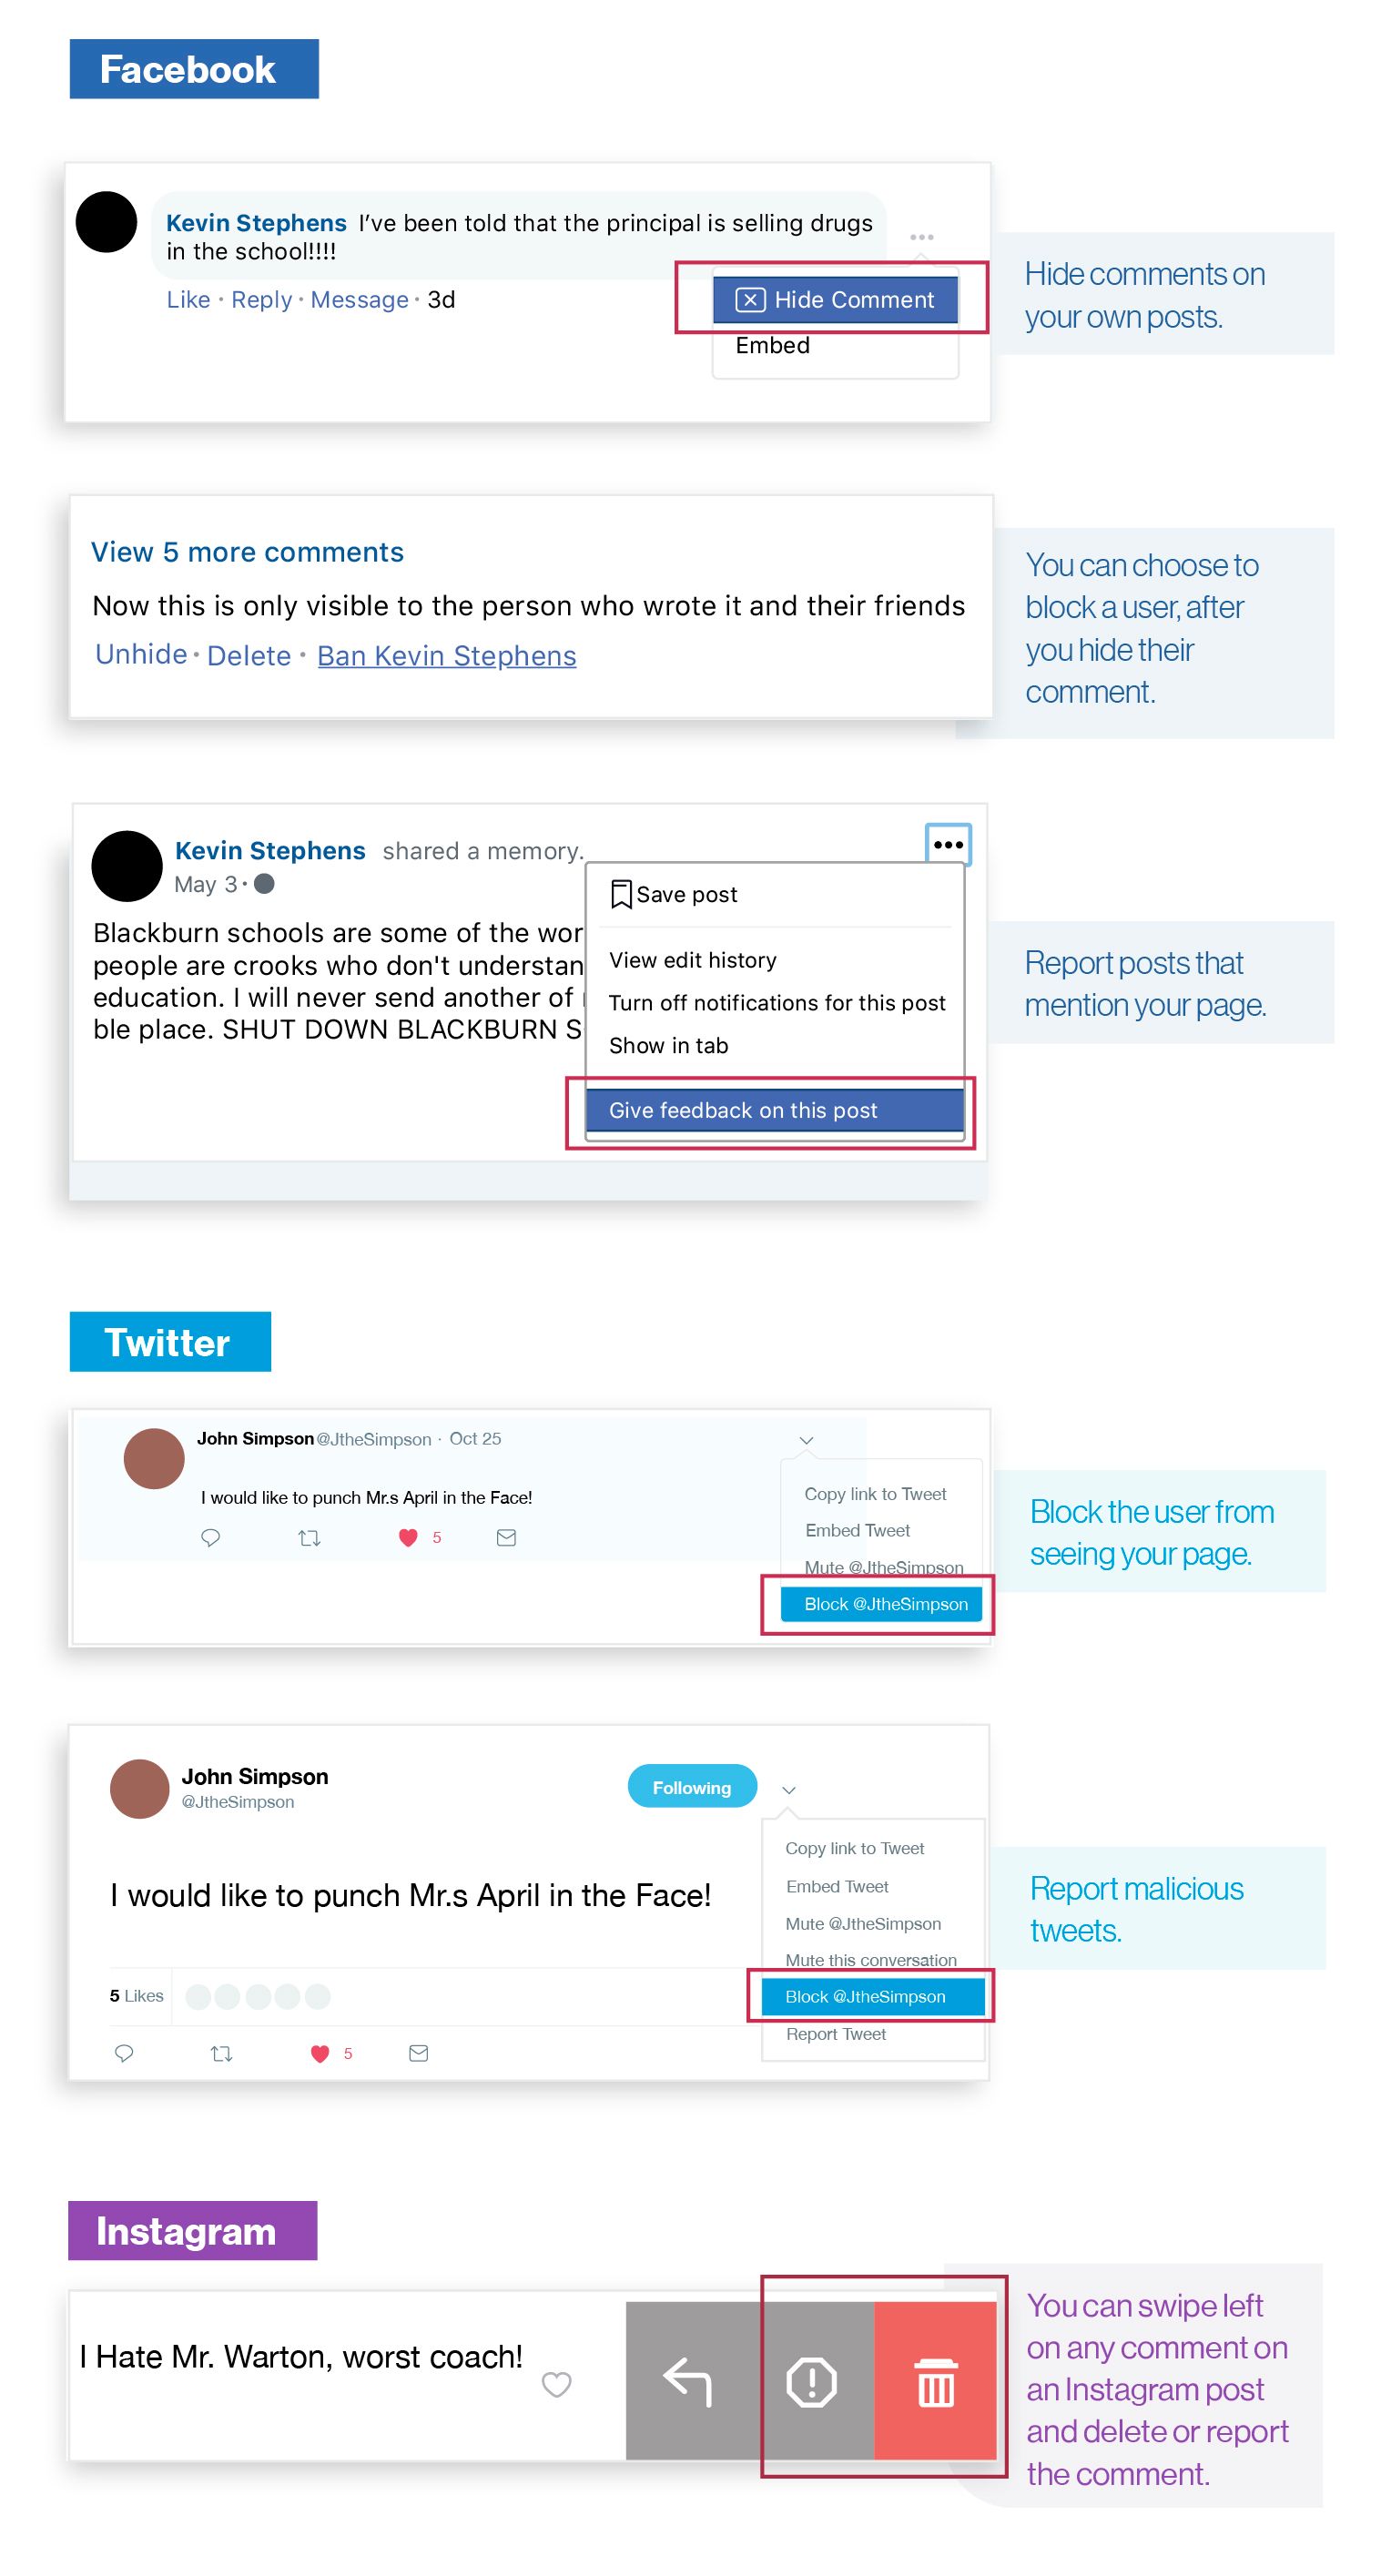 Image: Instagram/Twitter/Facebook hide and block option locations. It is easy to hide or delete inappropriate comments and to report abusive users across these social media channels.